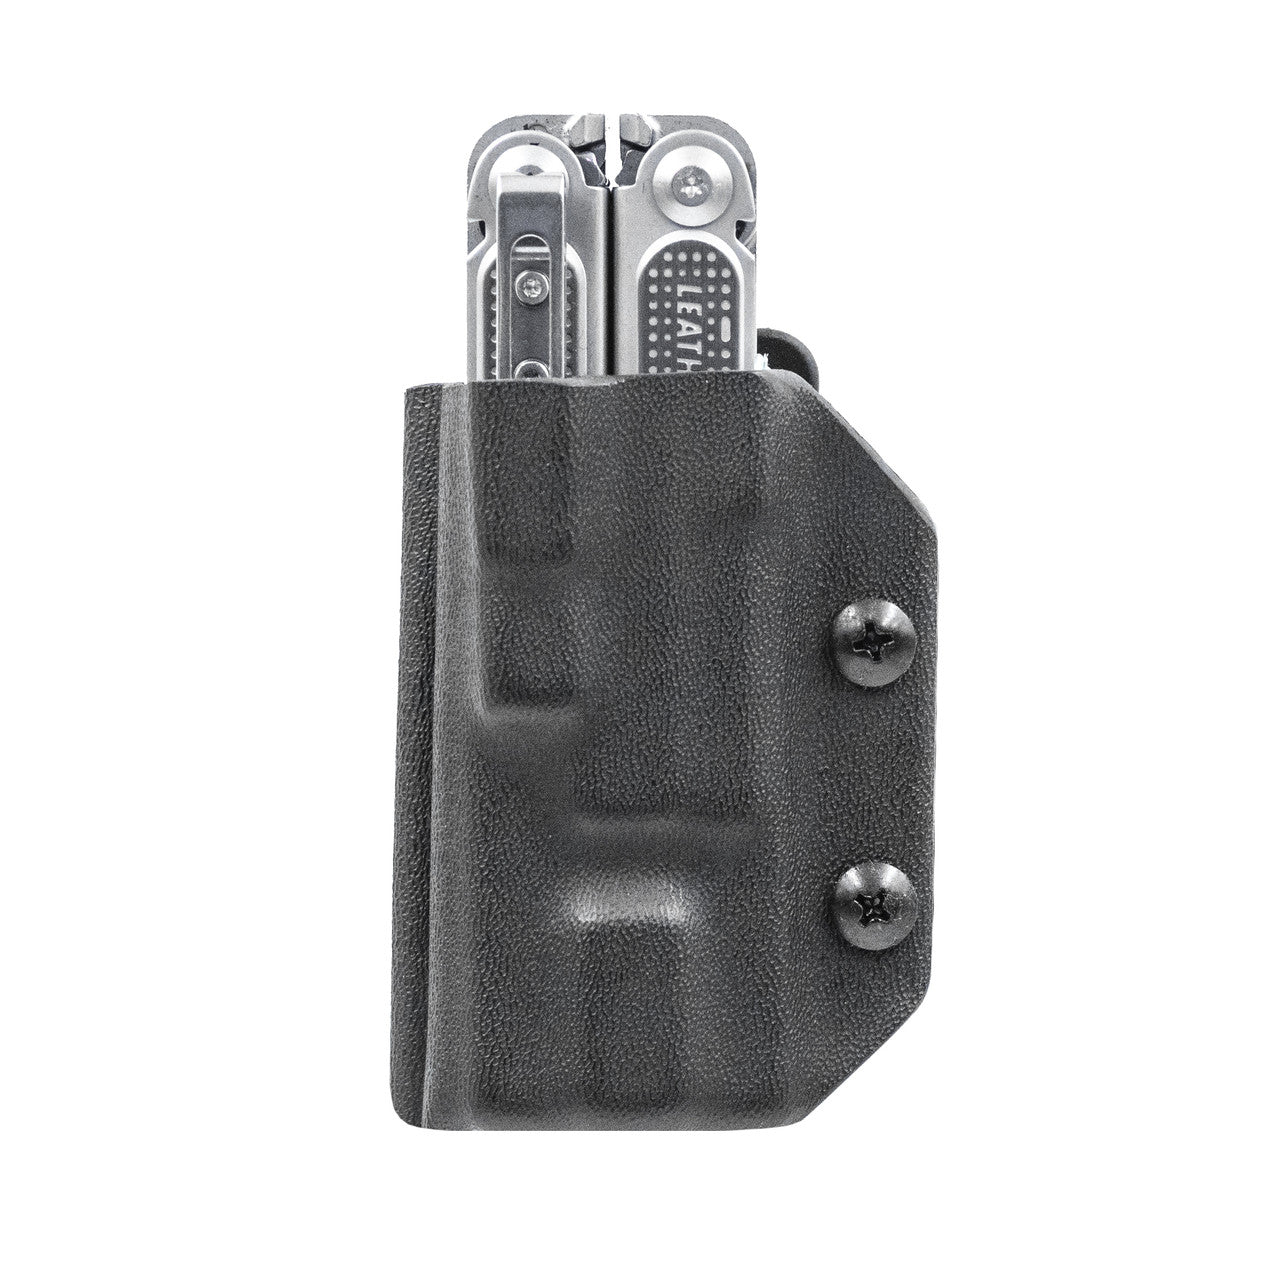 Kydex Sheath for the Leatherman Free P2 Clip & Carry